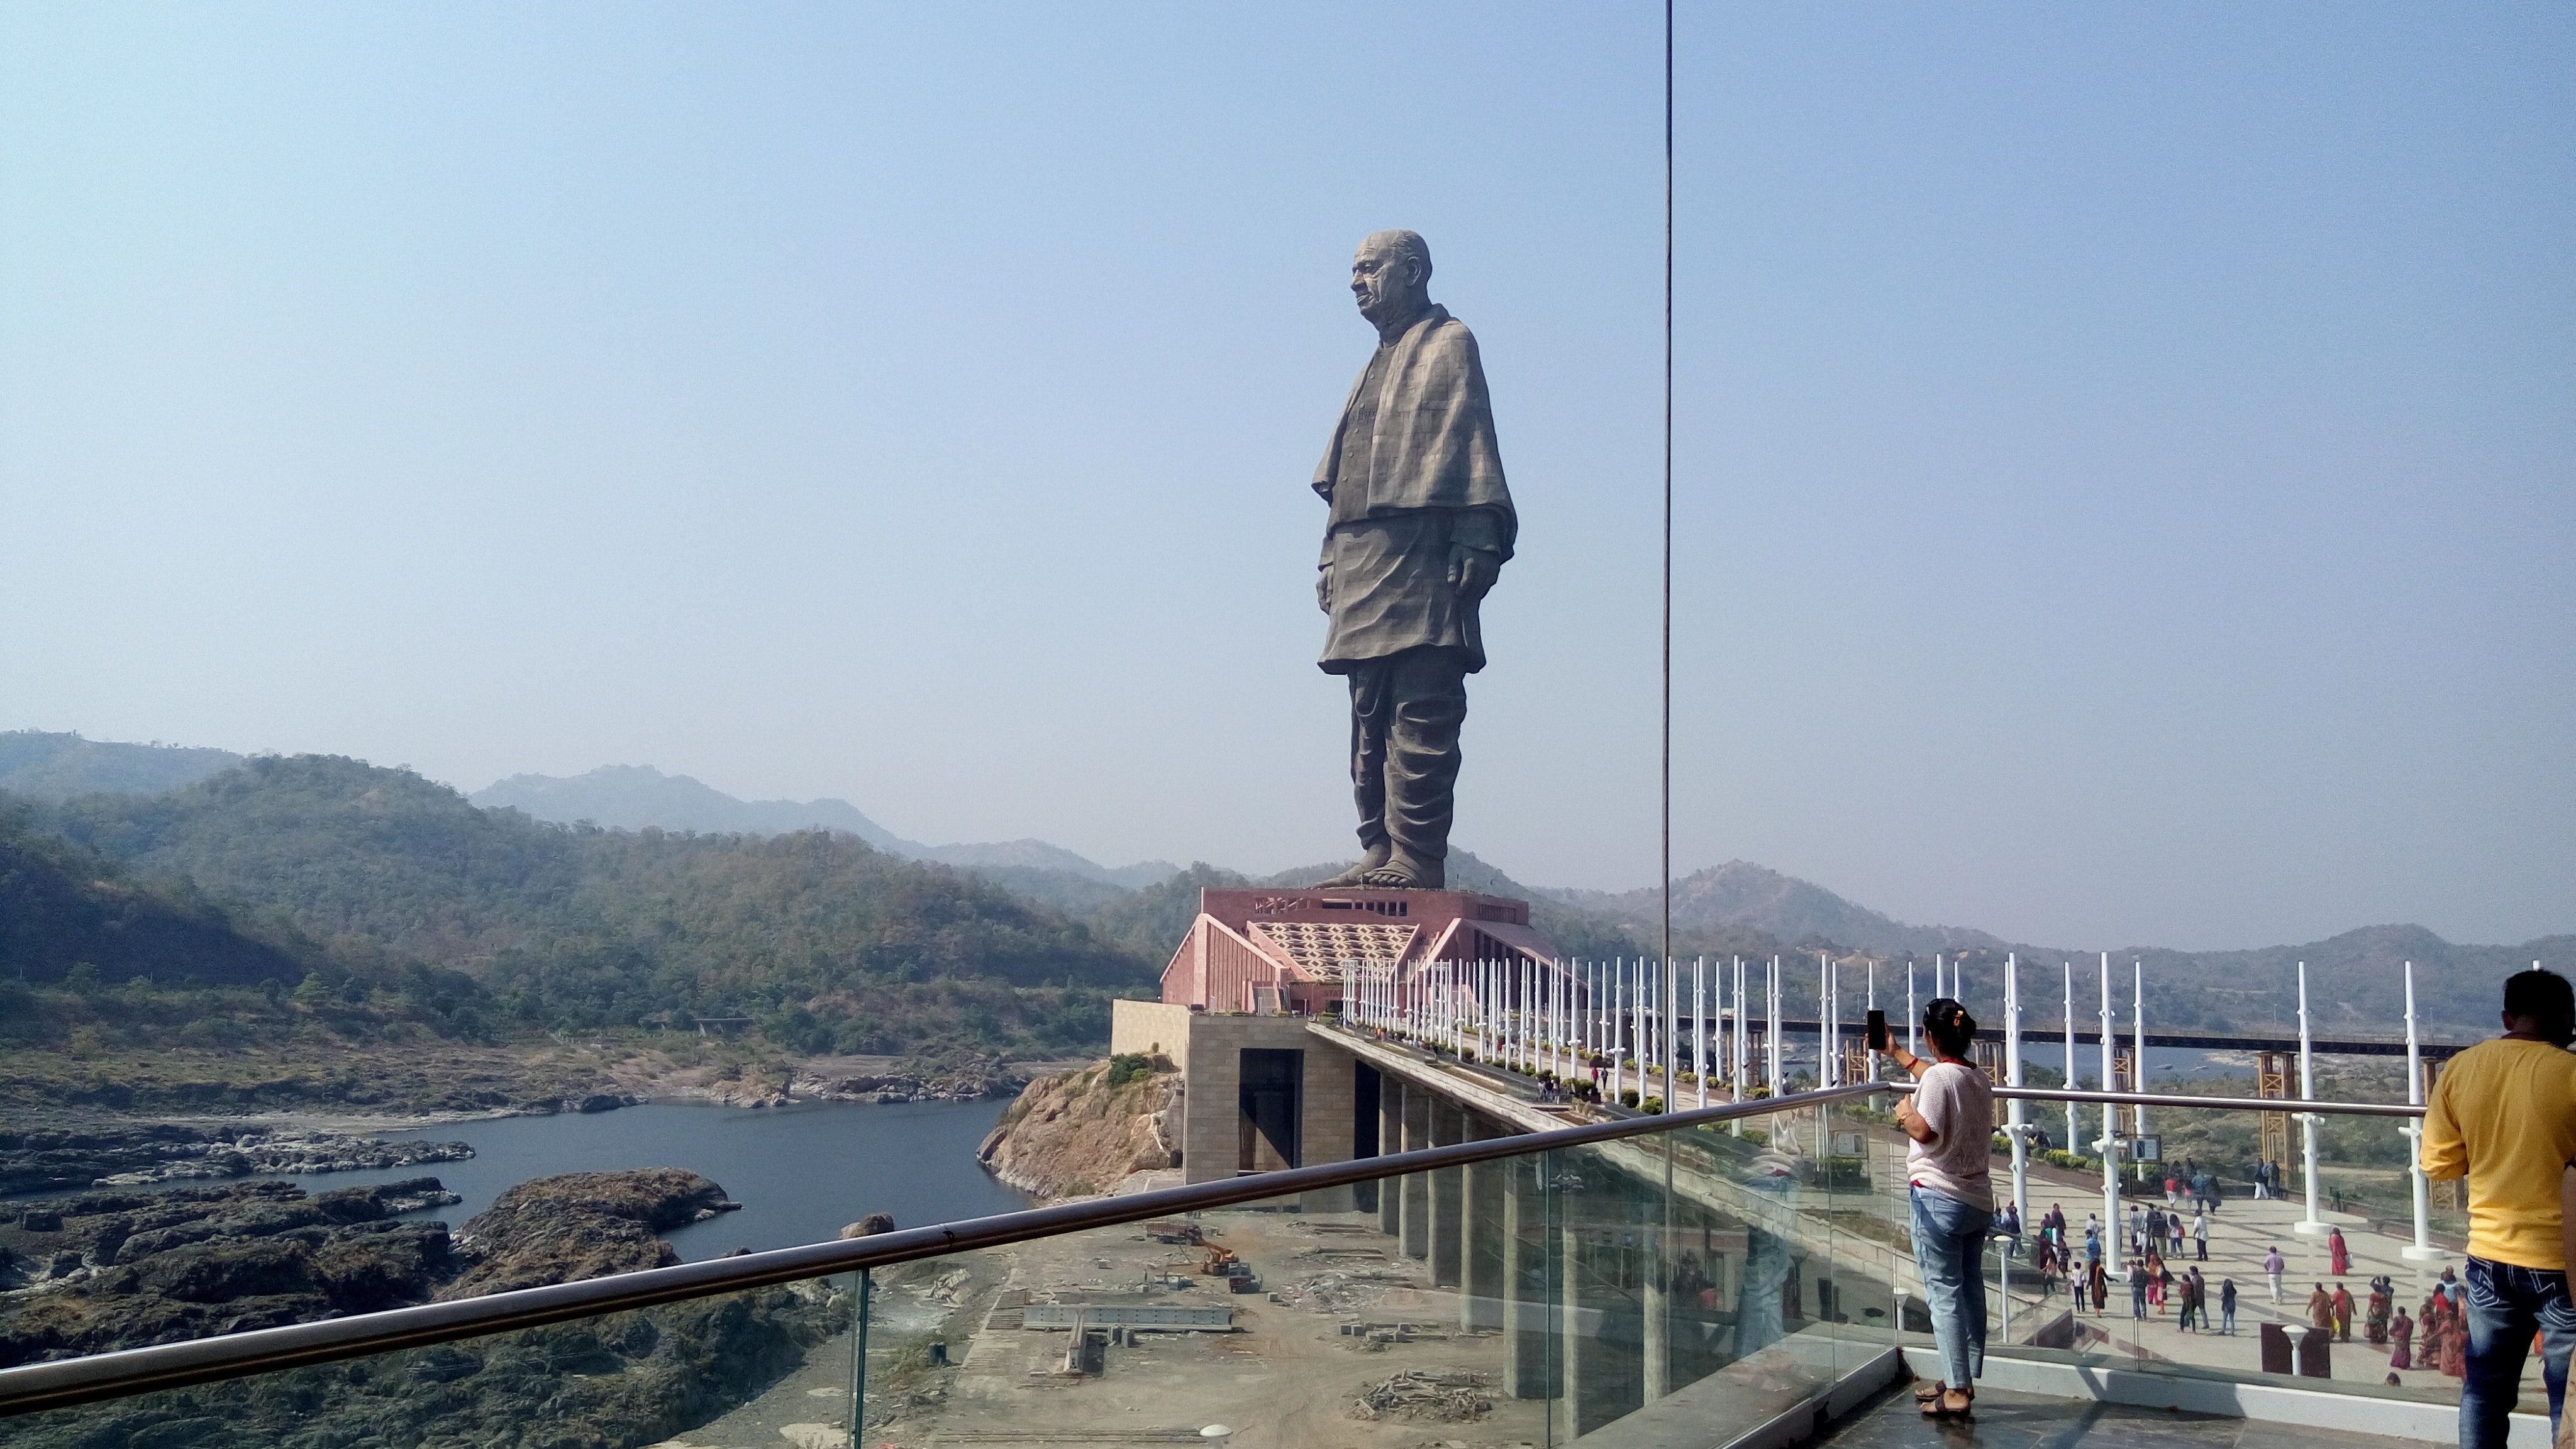 Free of Statue of Unity, worlds biggest statue